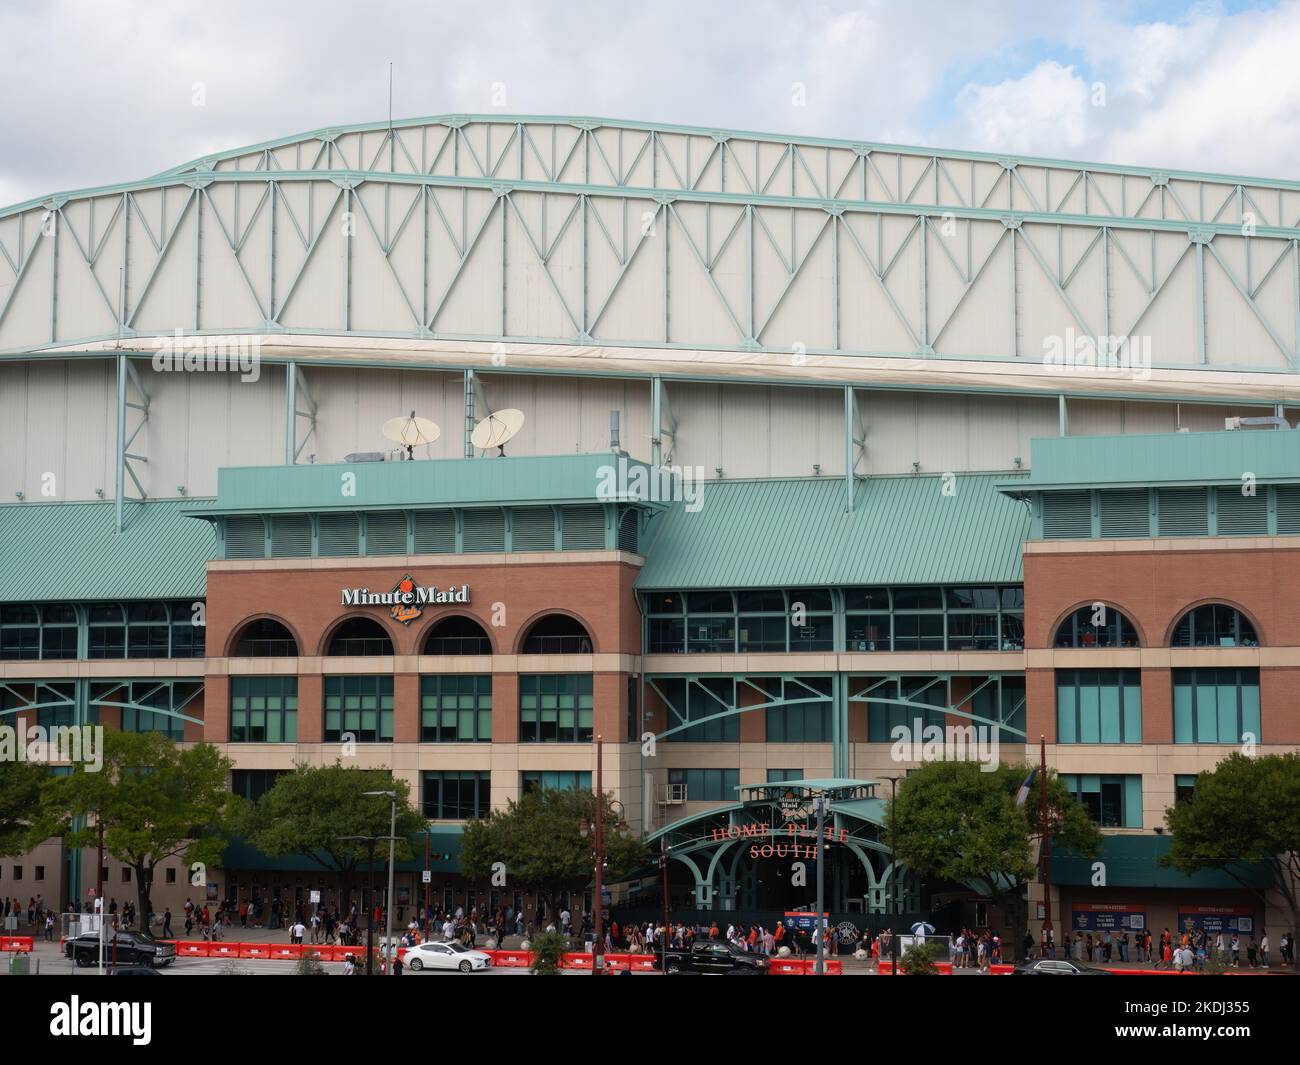 Exterior of the Minute Maid Stadium in Houston, Texas, where the Astros won the 2022 World Series. Fans are lined up to enter the team store. Stock Photo